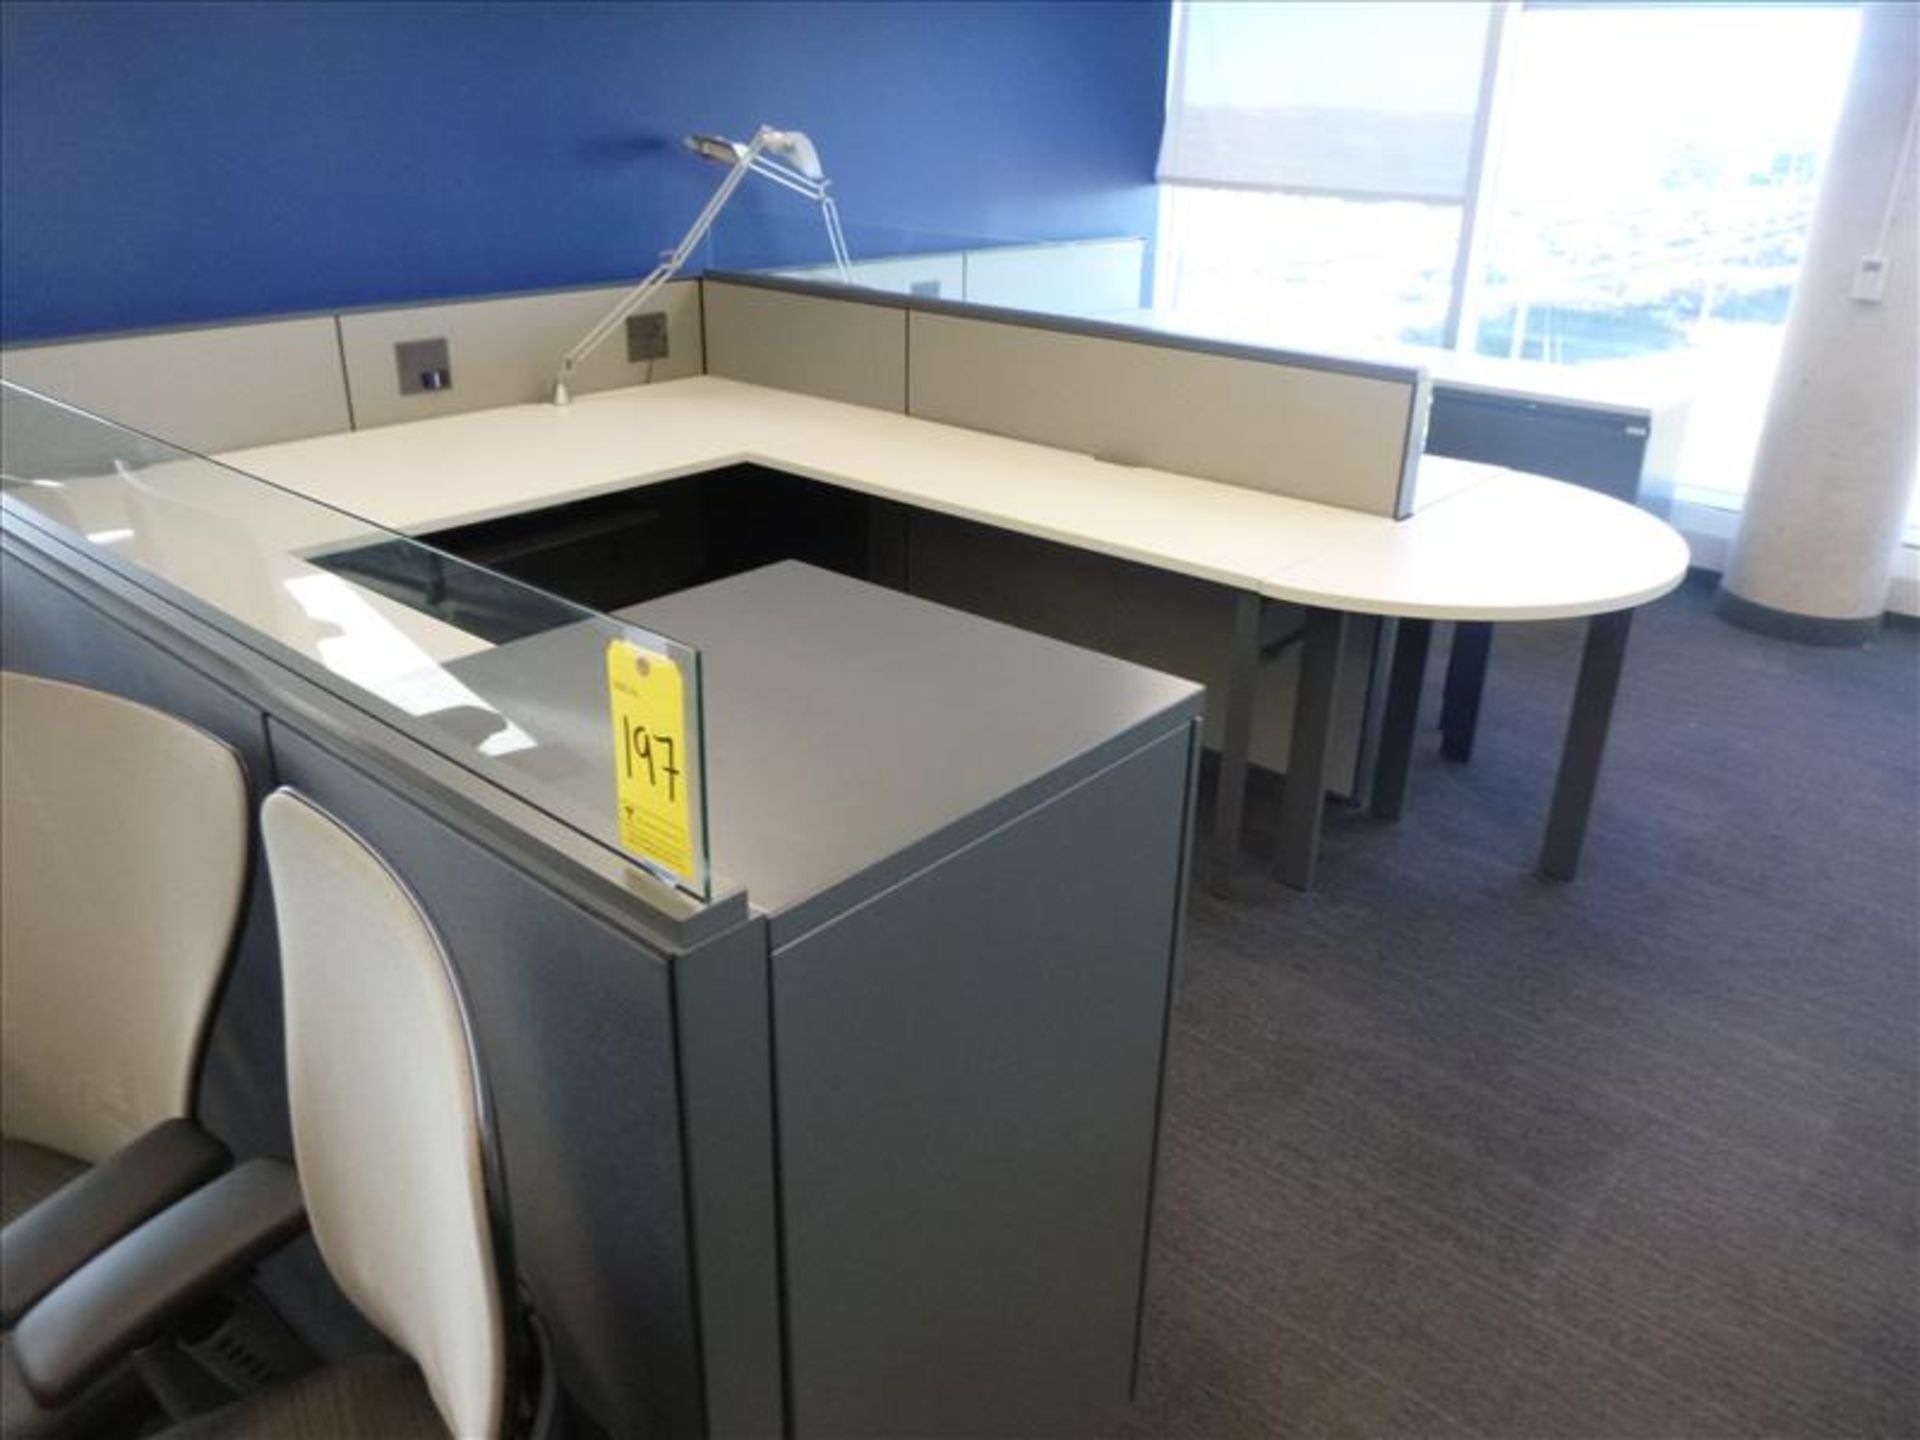 (2) Haworth cubicle workstations, approx. 10' x 16.5' footprint (excl. contents and office